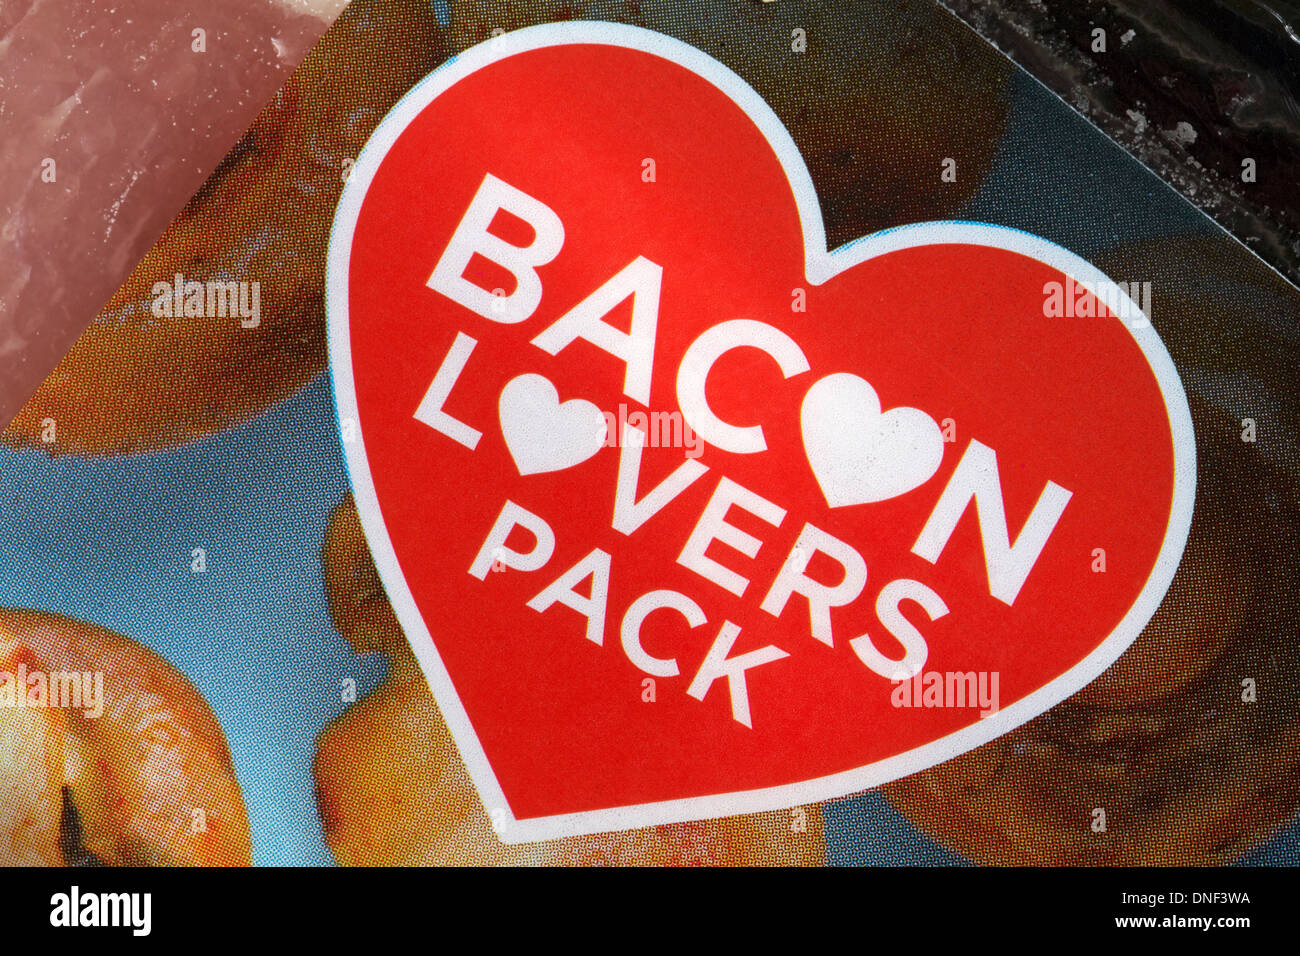 Bacon lovers pack - detail on pack of bacon Stock Photo